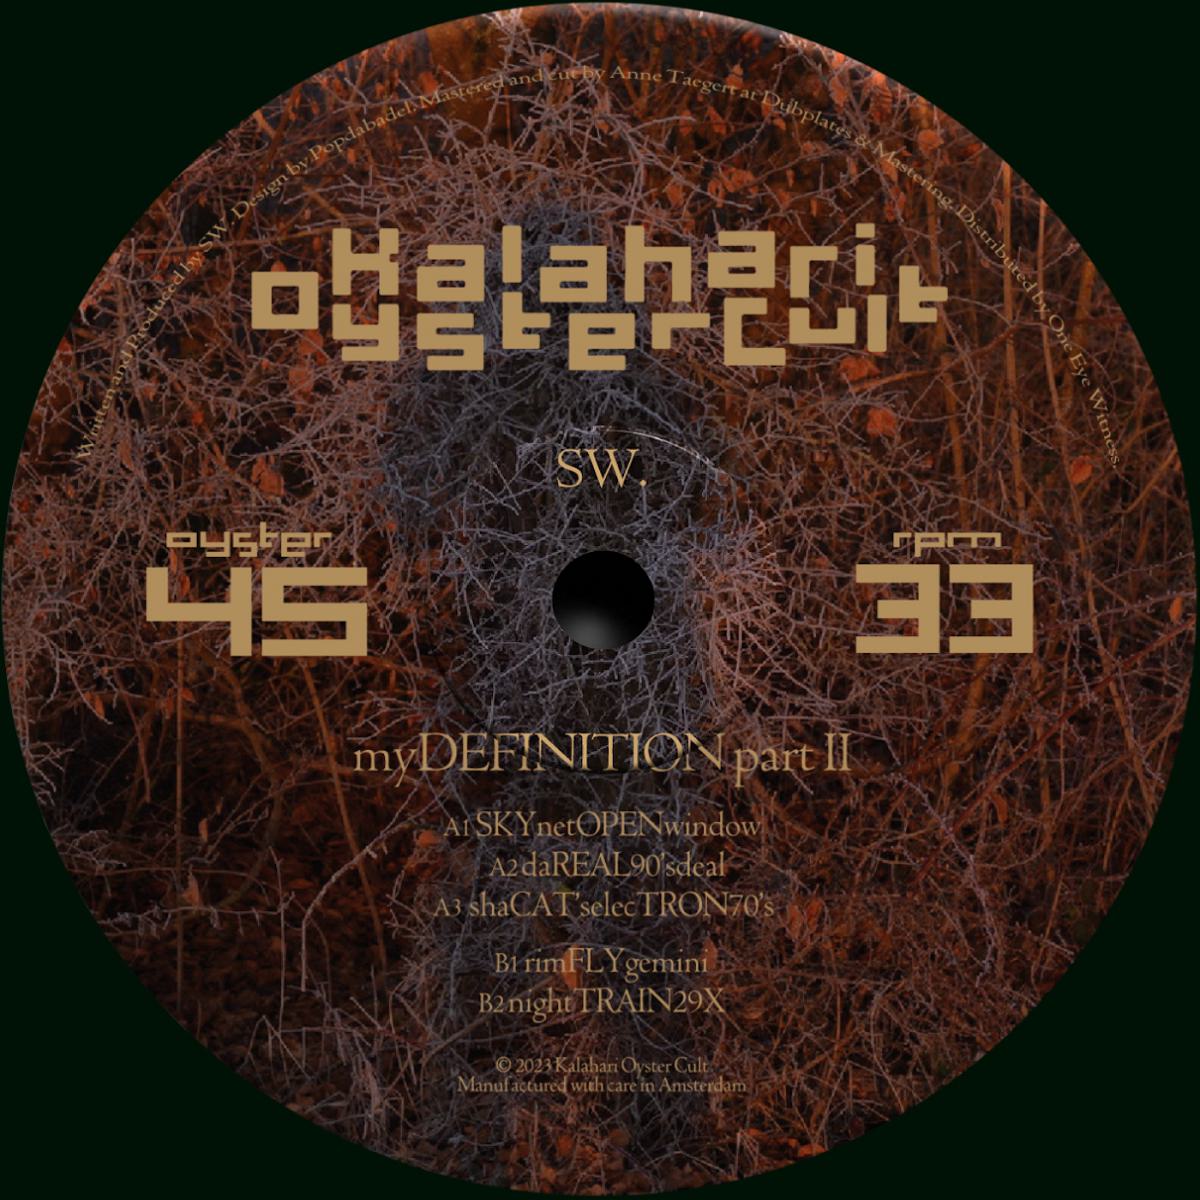 image cover: SW. - myDEFINITION Part II on Kalahari Oyster Cult